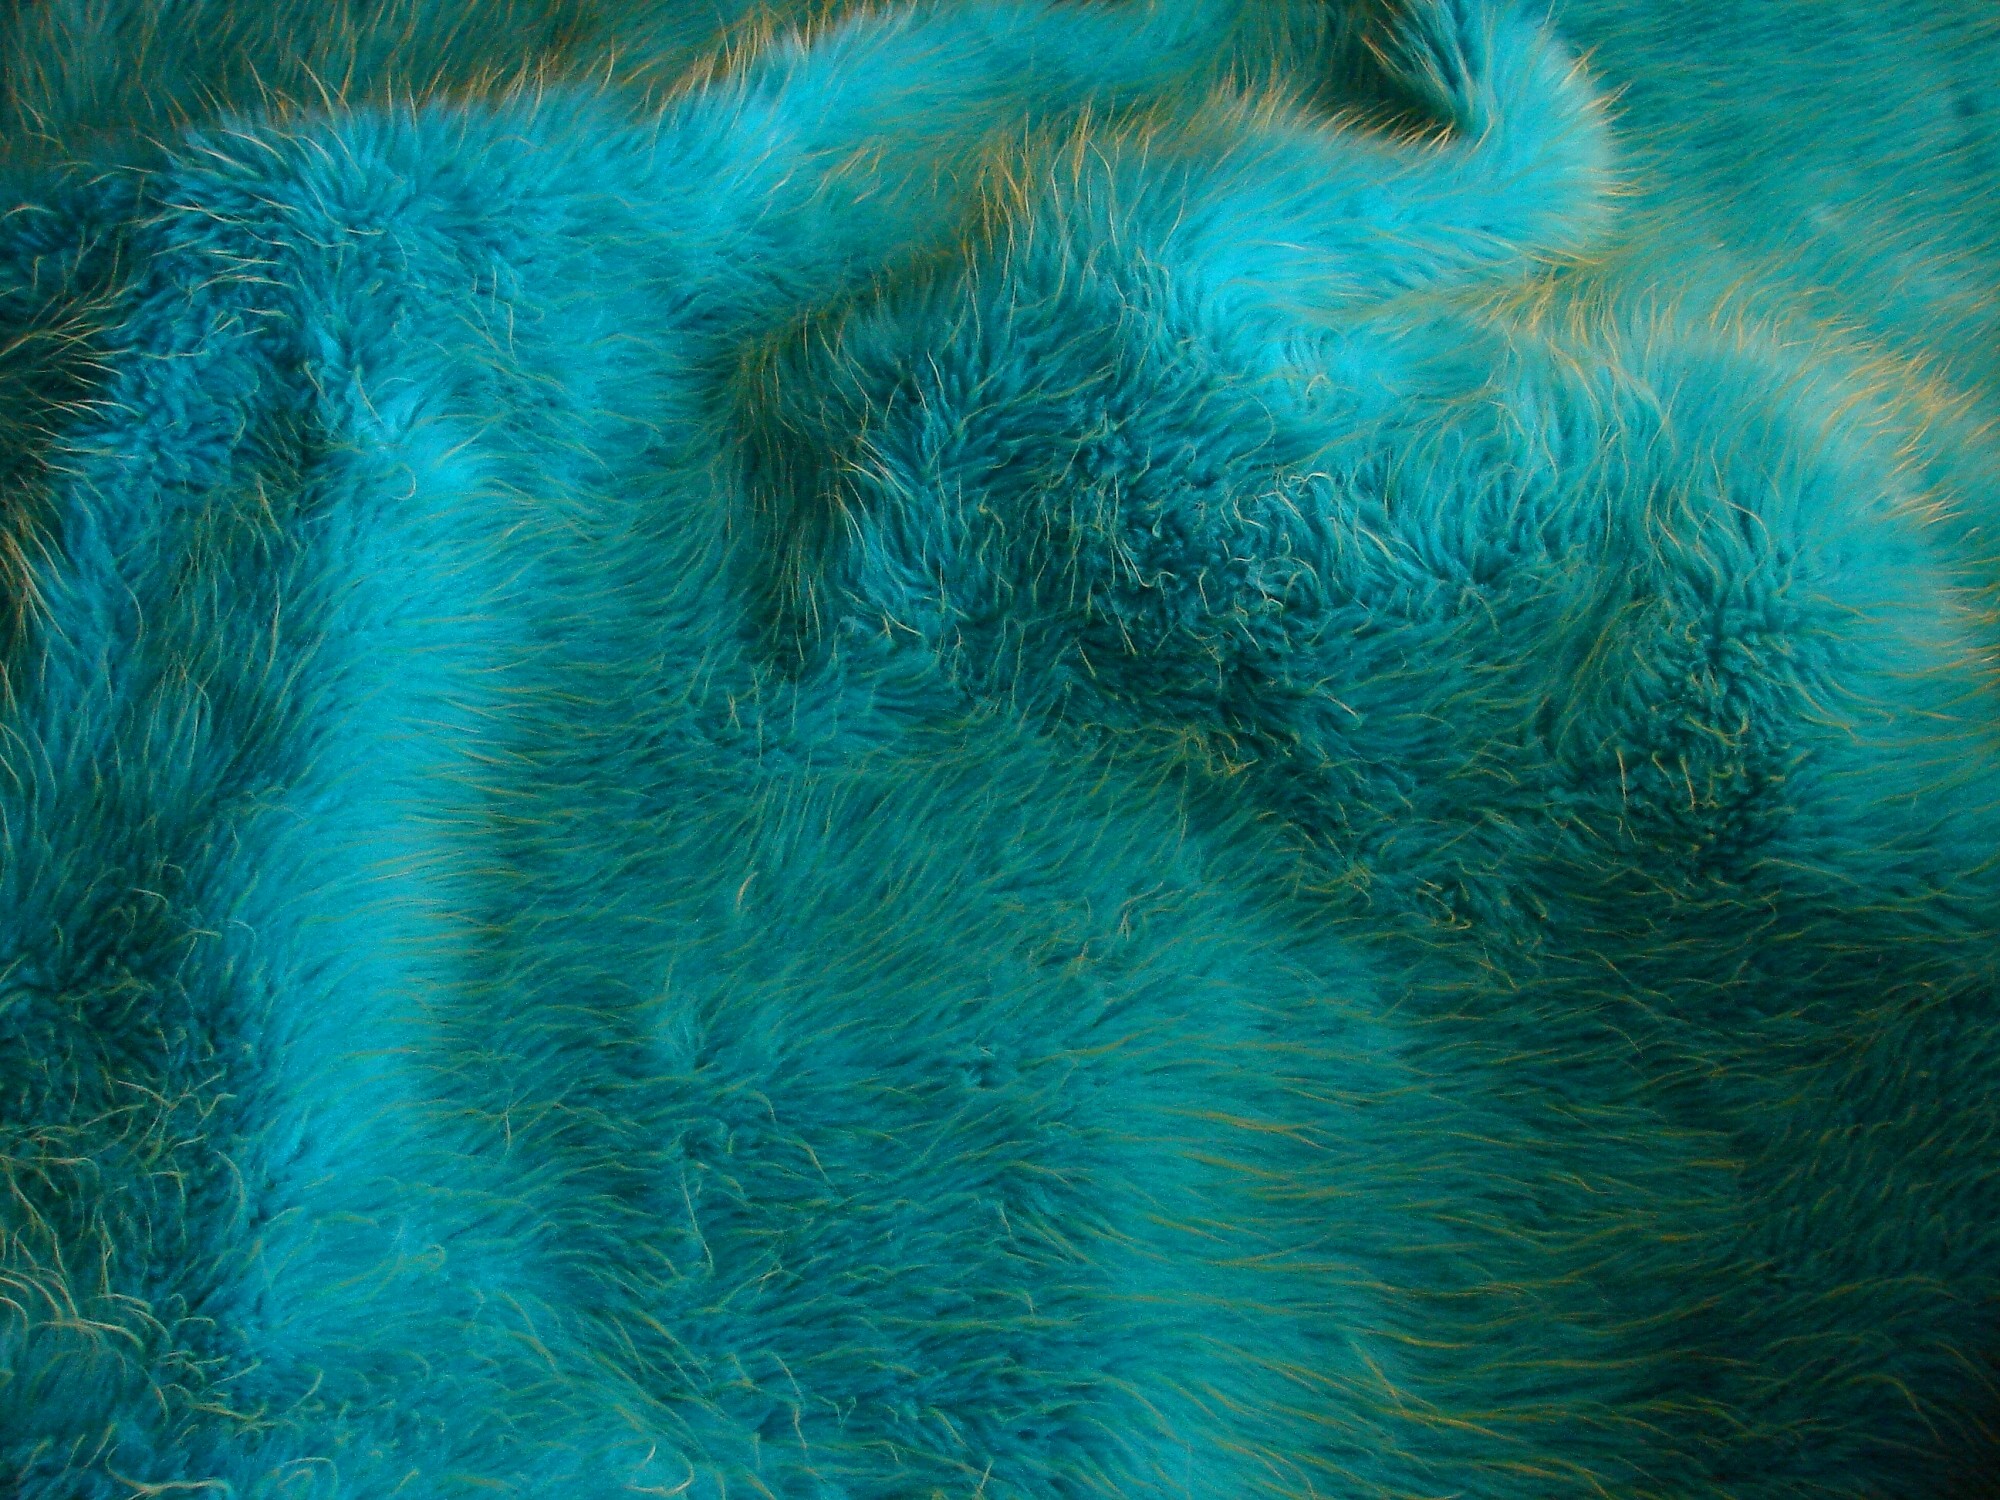 2000x1500 ... Blue and Green Fur Texture 1 by FantasyStock